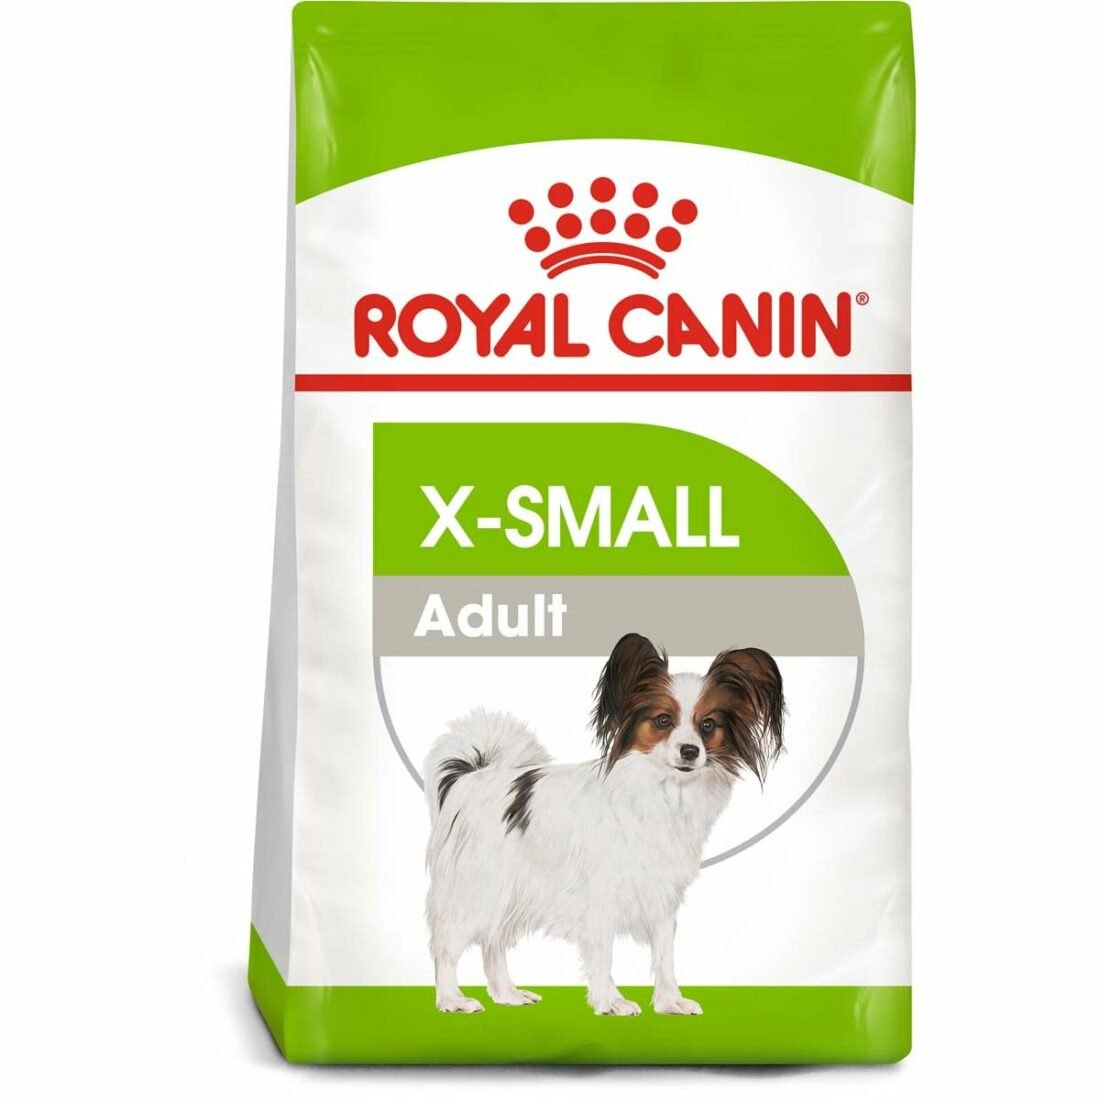 ROYAL CANIN X-SMALL Adult 2